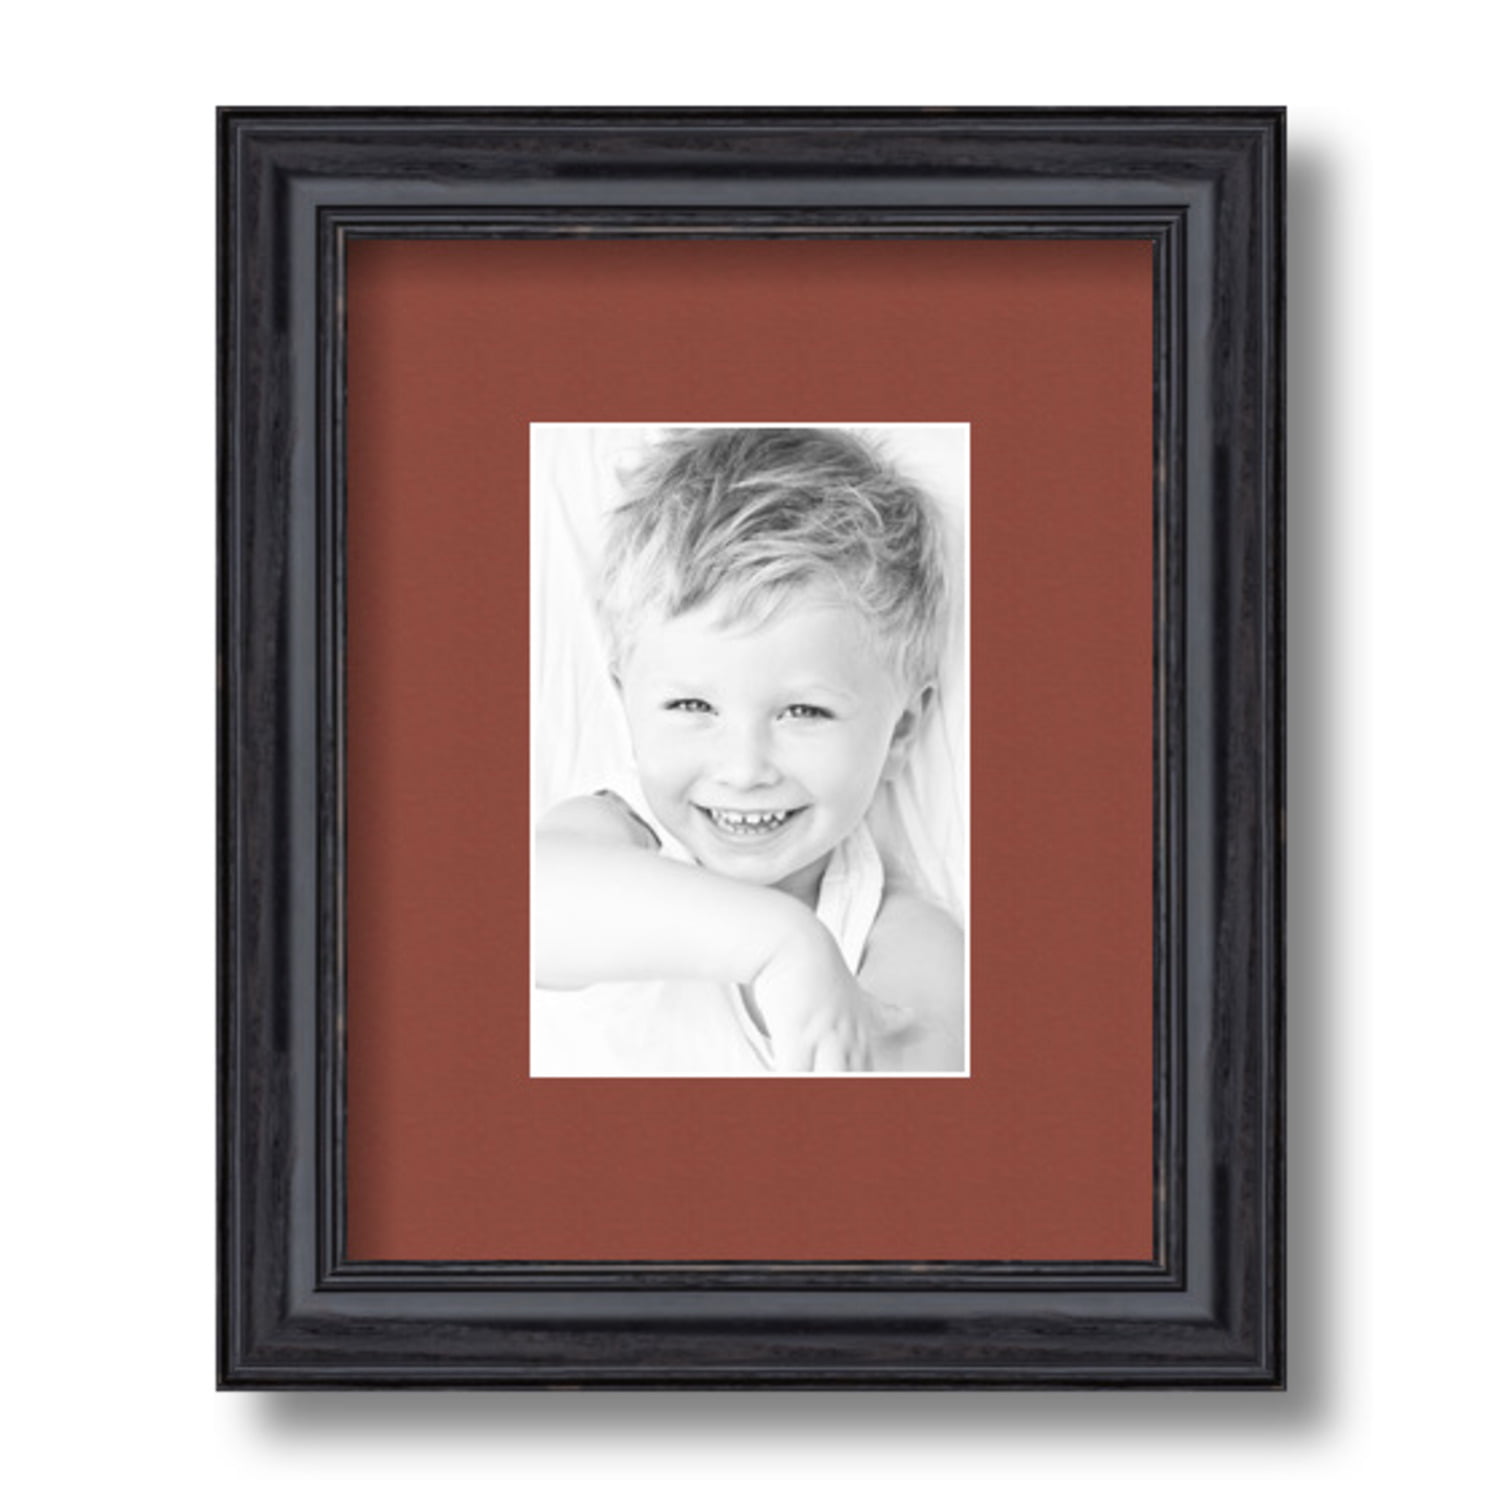 Arttoframes 8x10 Matted Picture Frame With 4x6 Single Mat Photo Opening